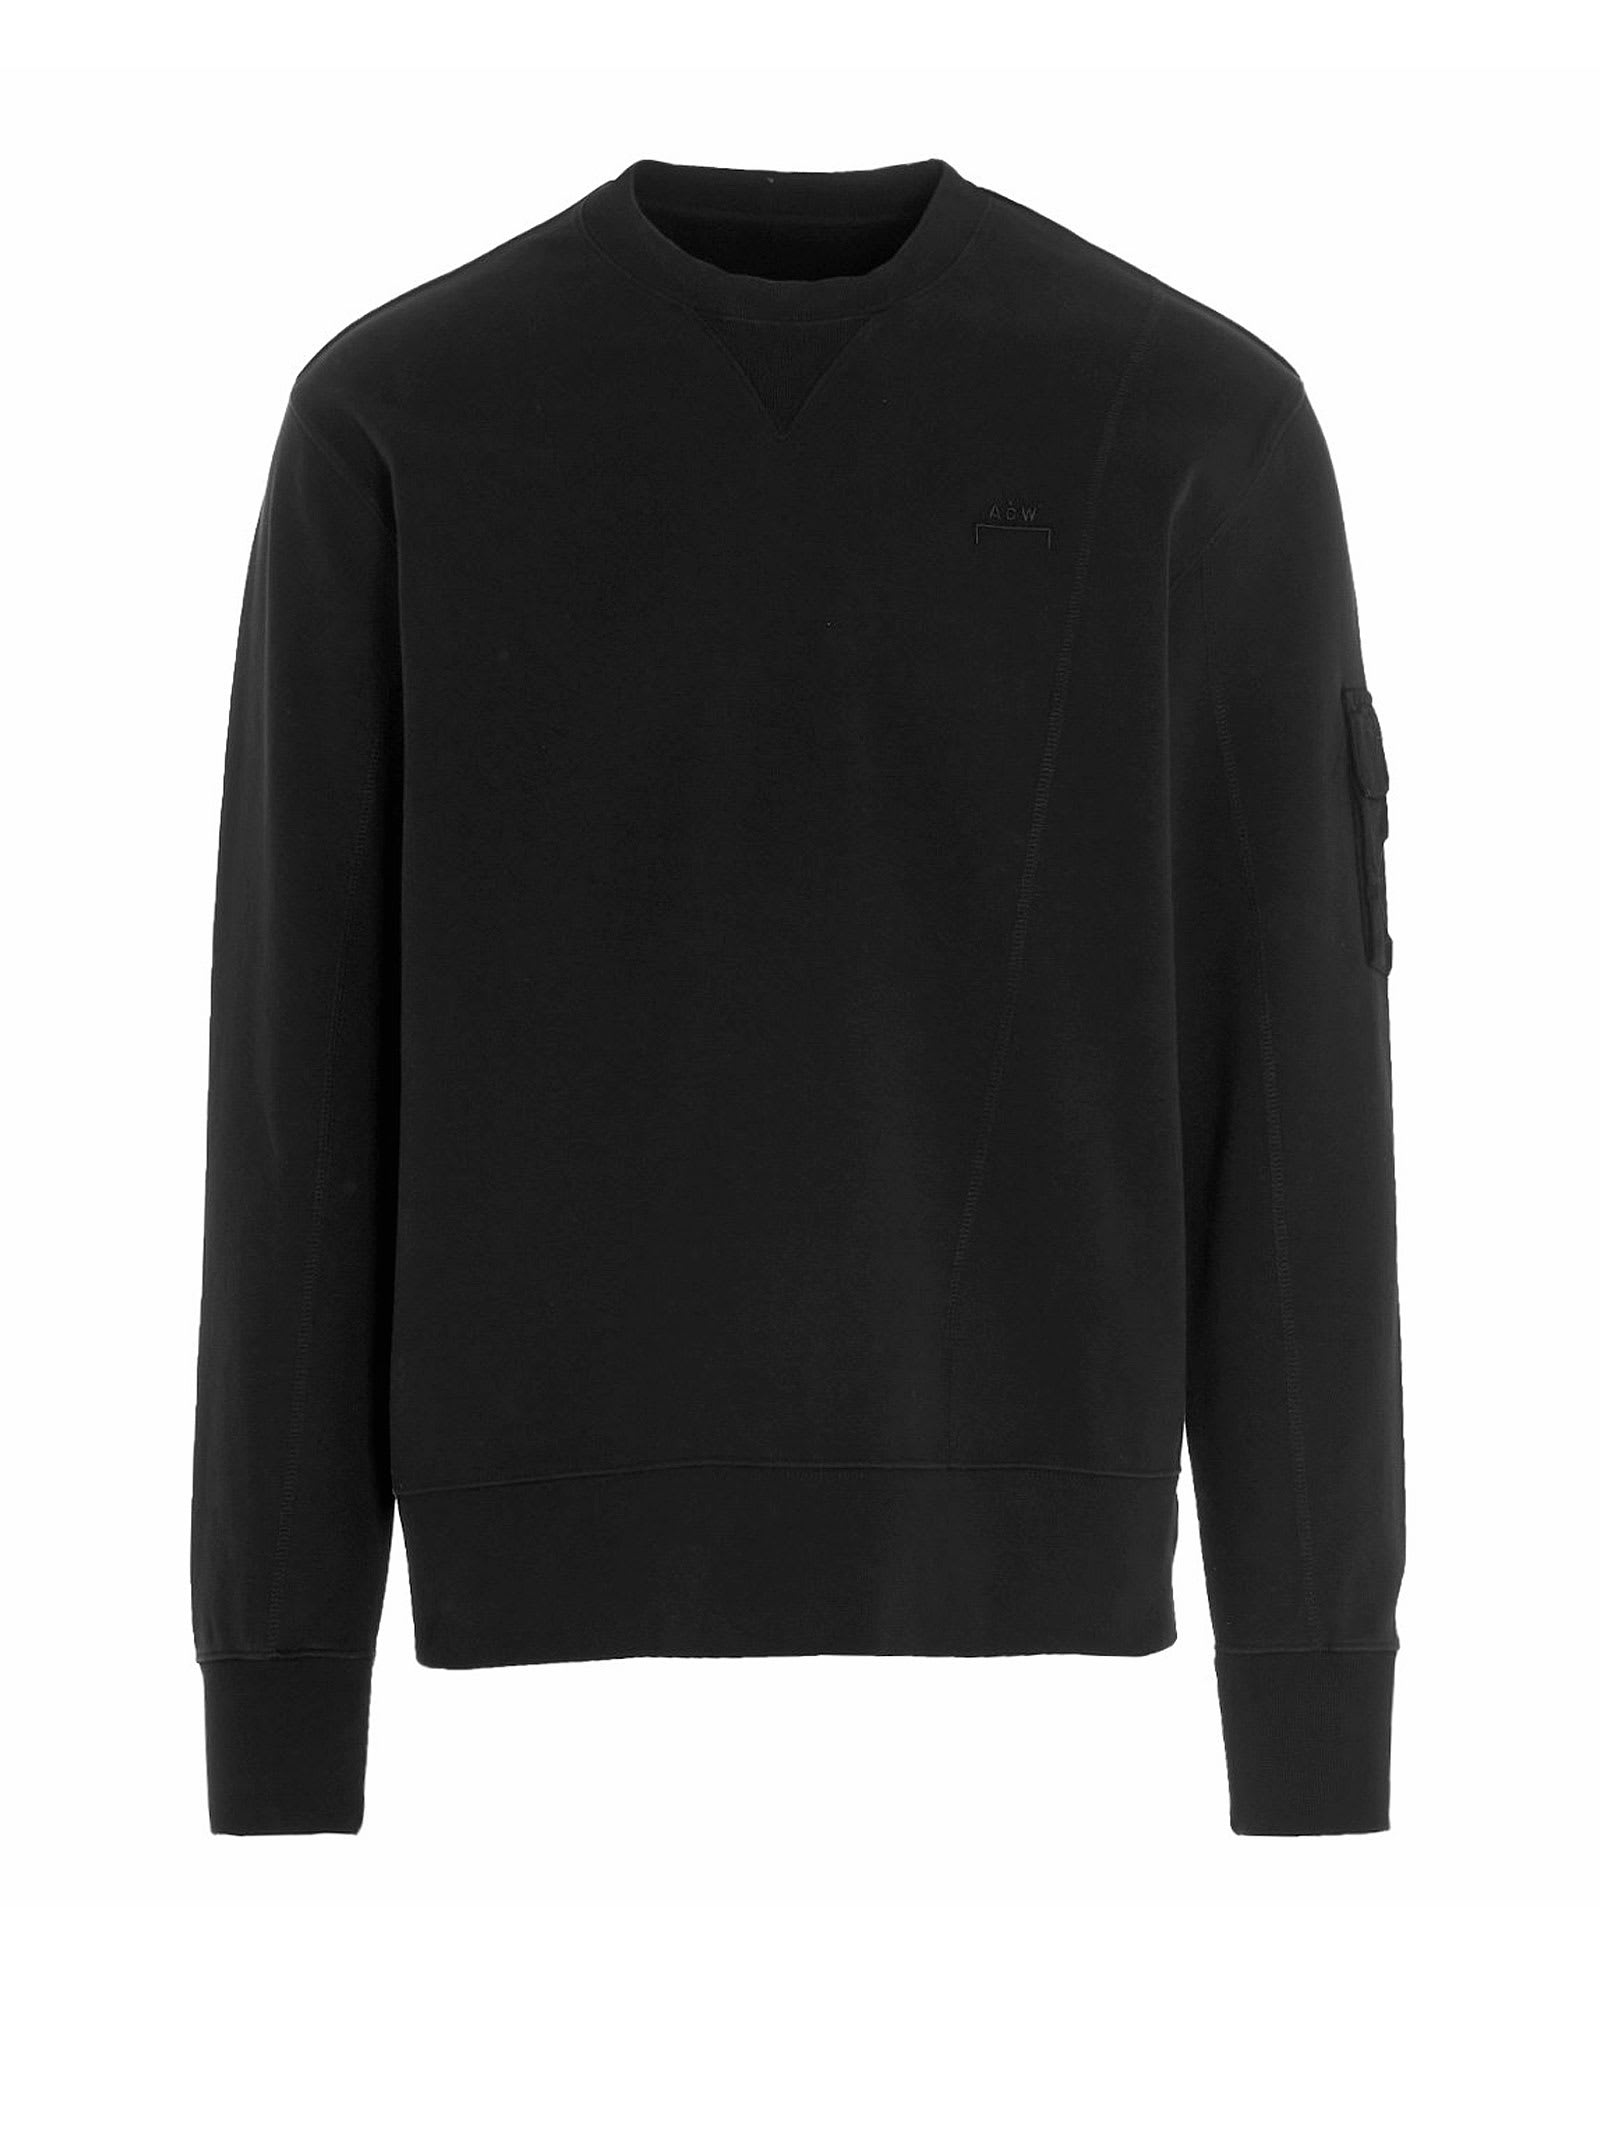 A-COLD-WALL Black Cotton Sweater